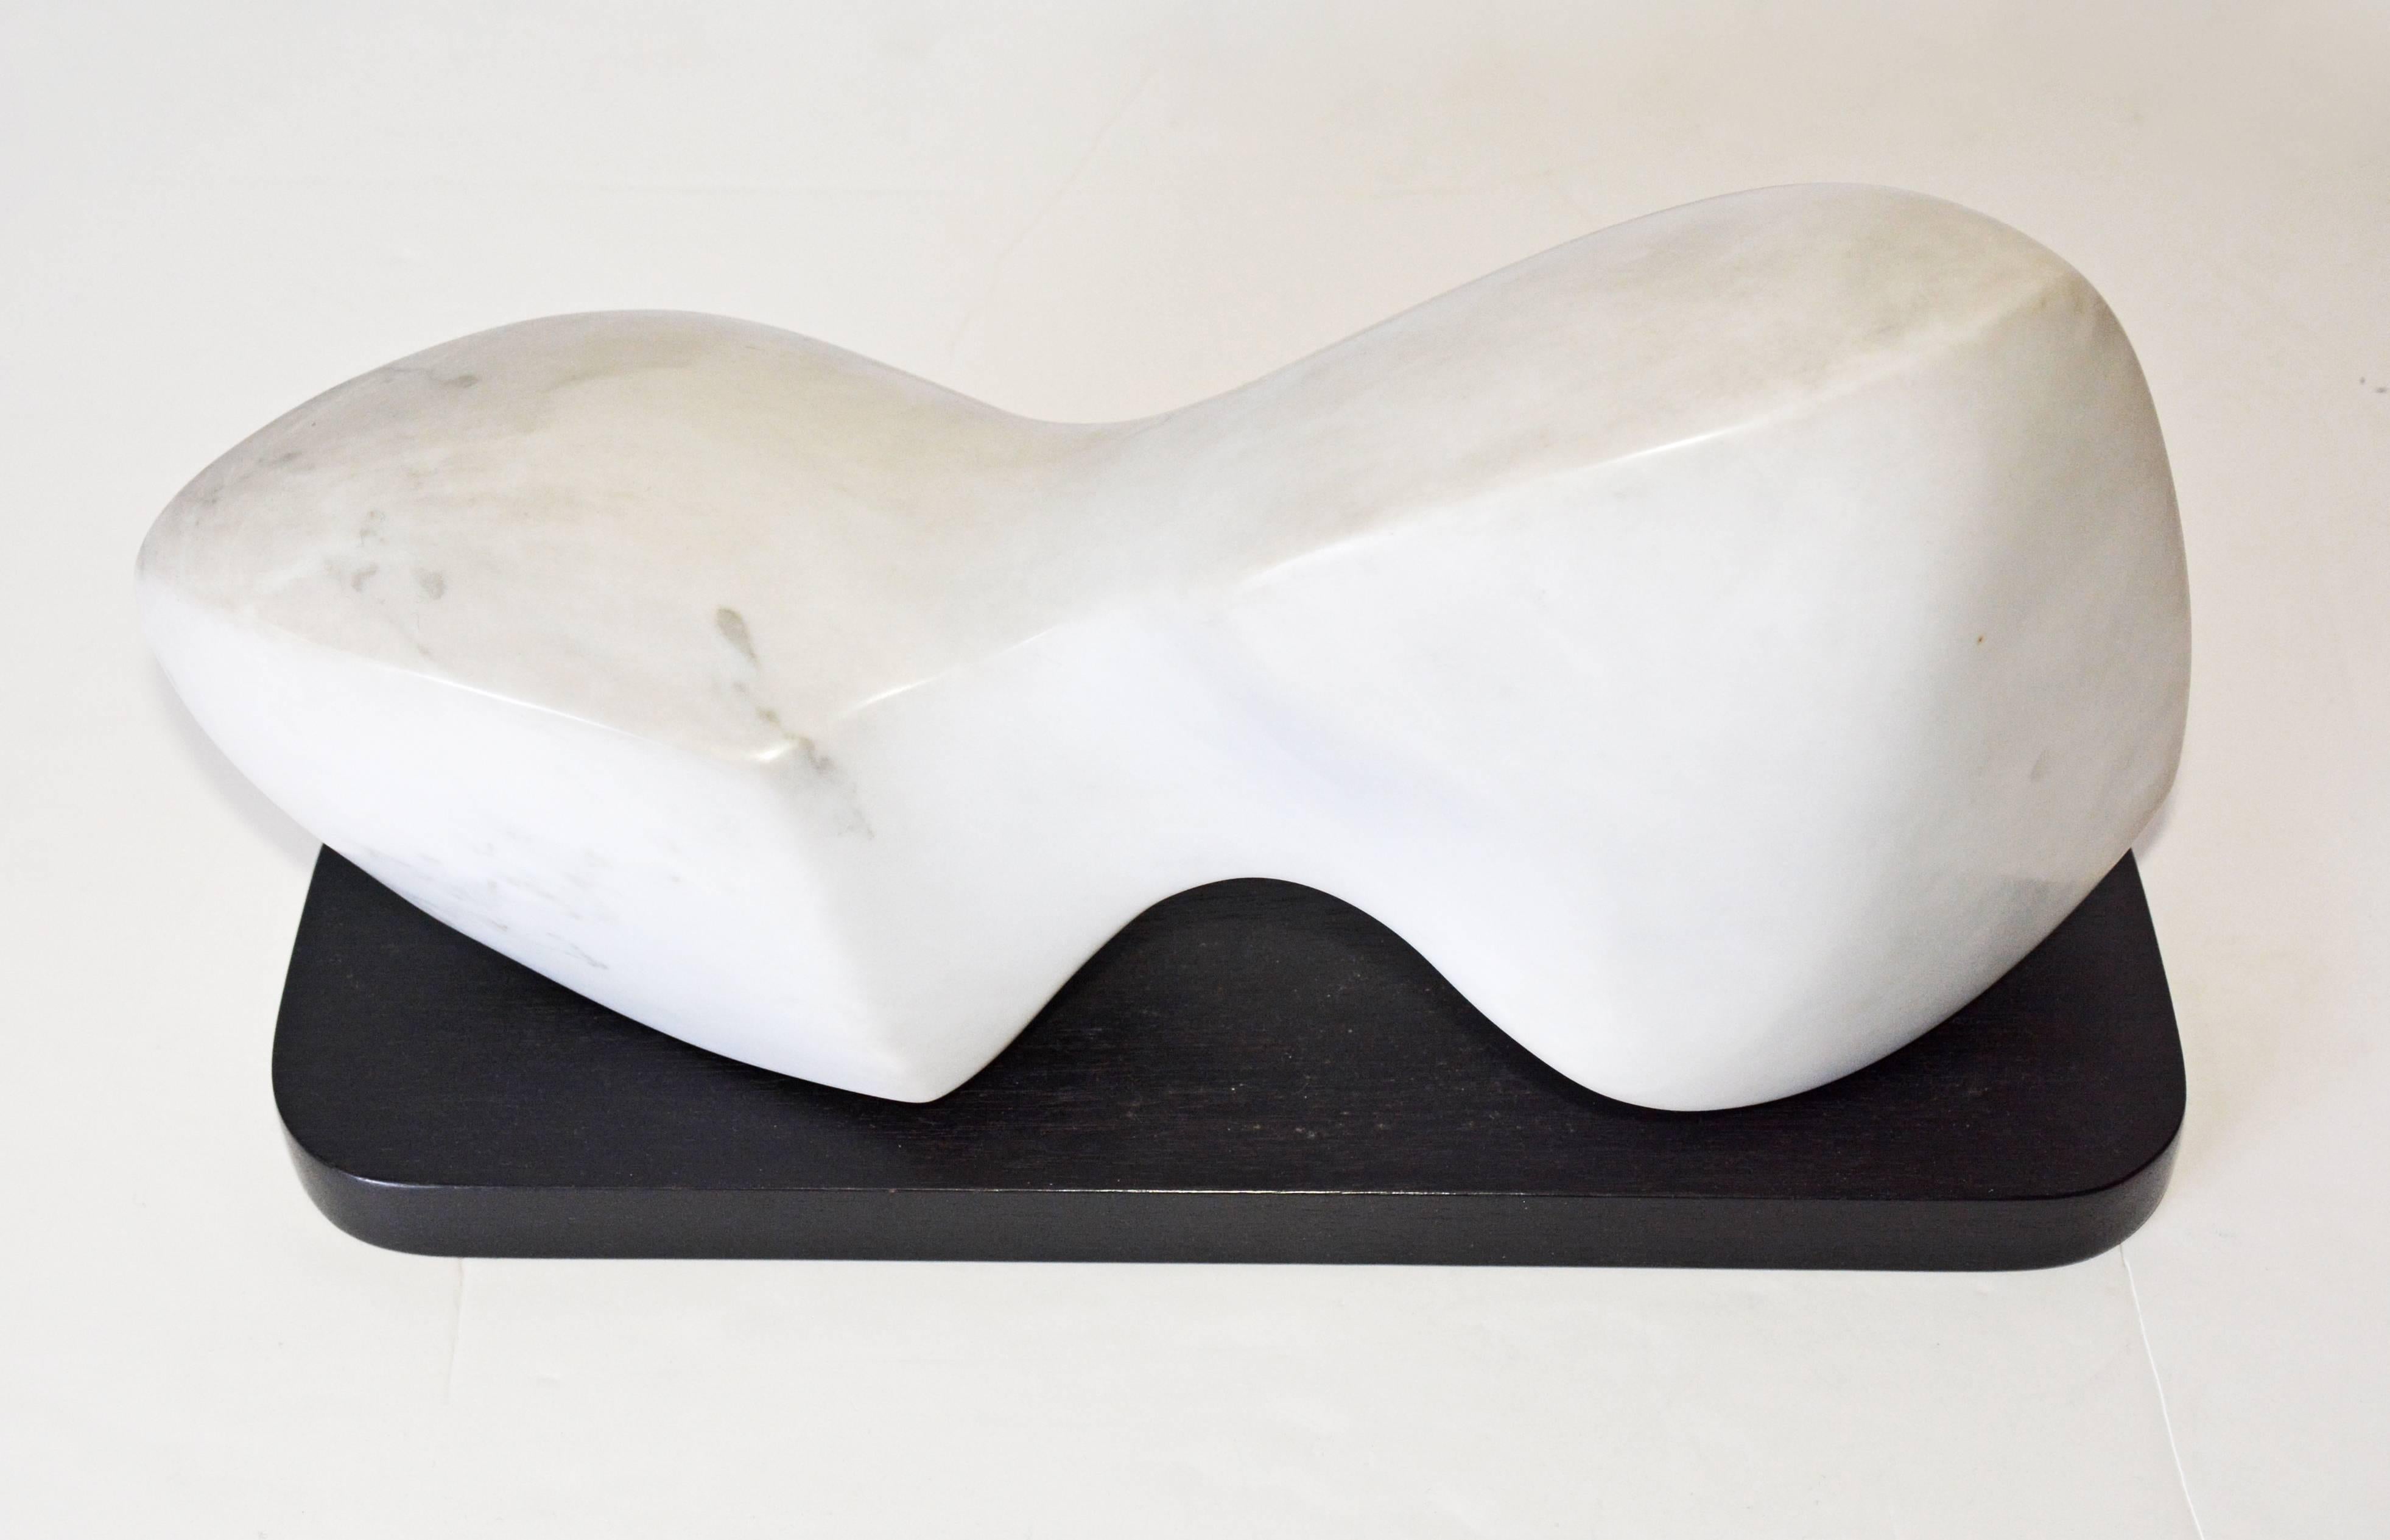 The contemporary white veined marble sculpture sits on a black wood base. Sculptor is Jean Downey, (1931-2009). She was born in Canada, studied art in Illinois, New York and Connecticut. Her work is included in private and corporate collections in